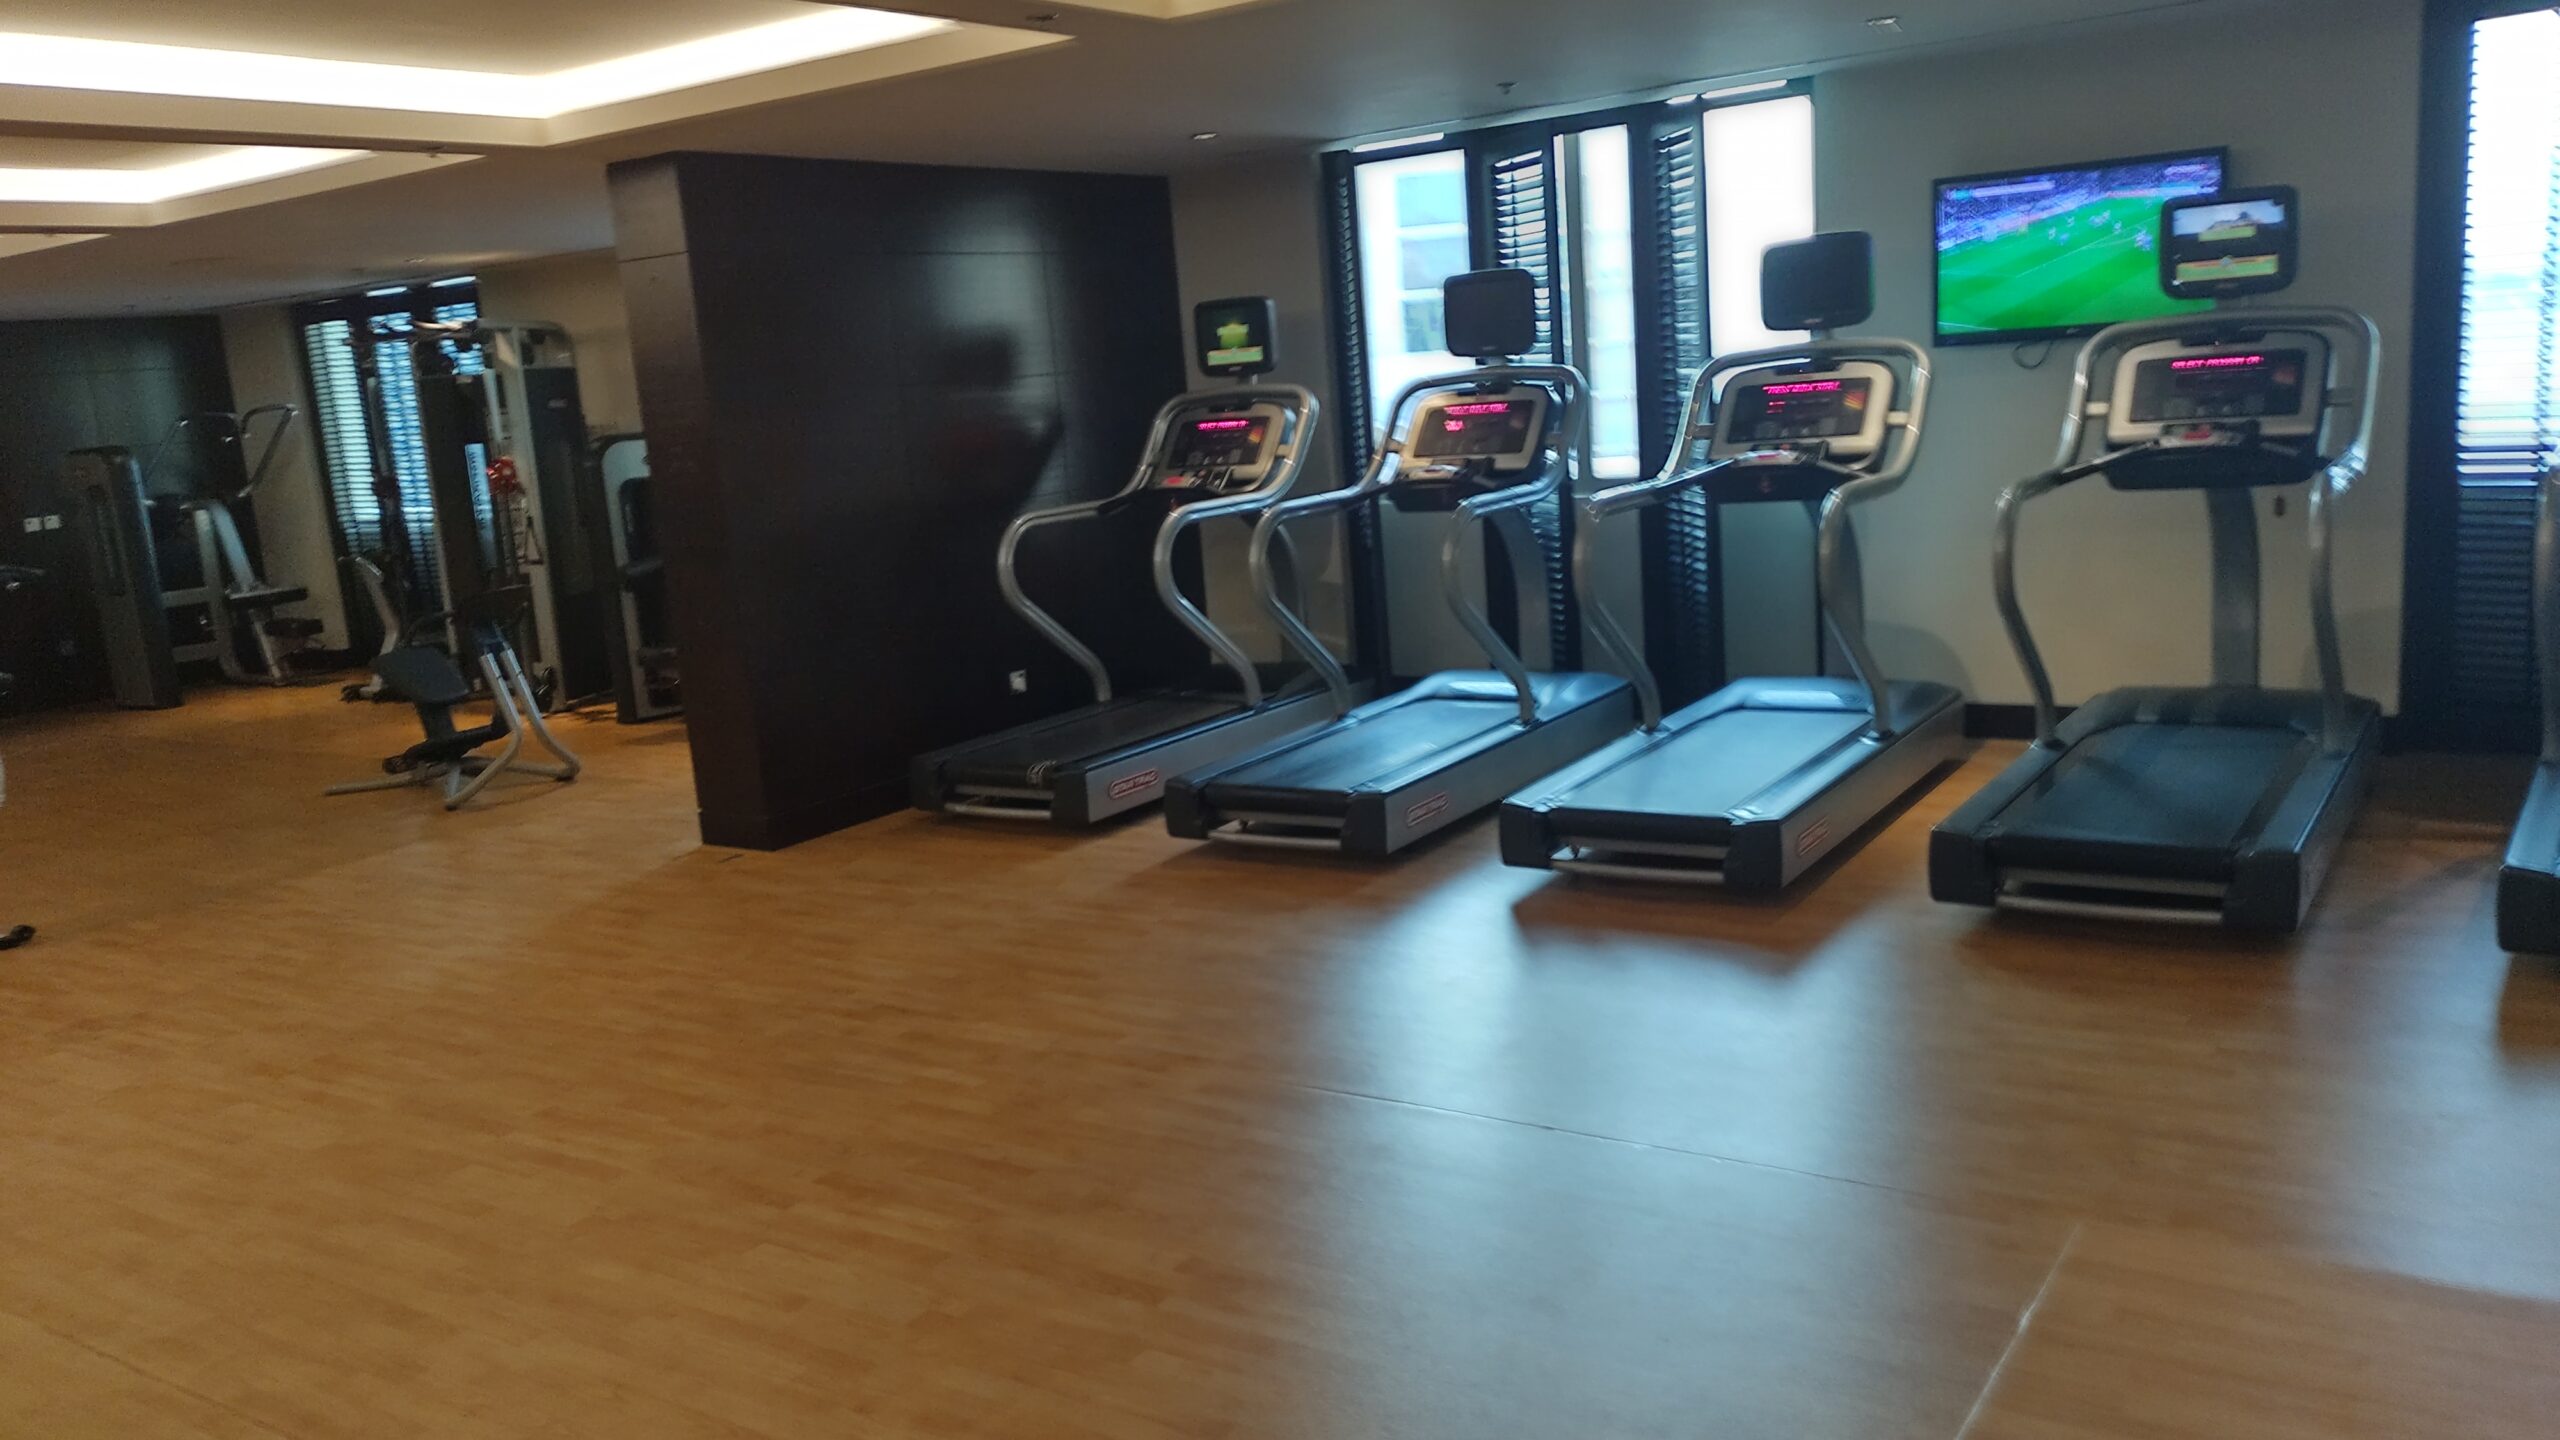 PICTURE OF THE TREADMILLS.